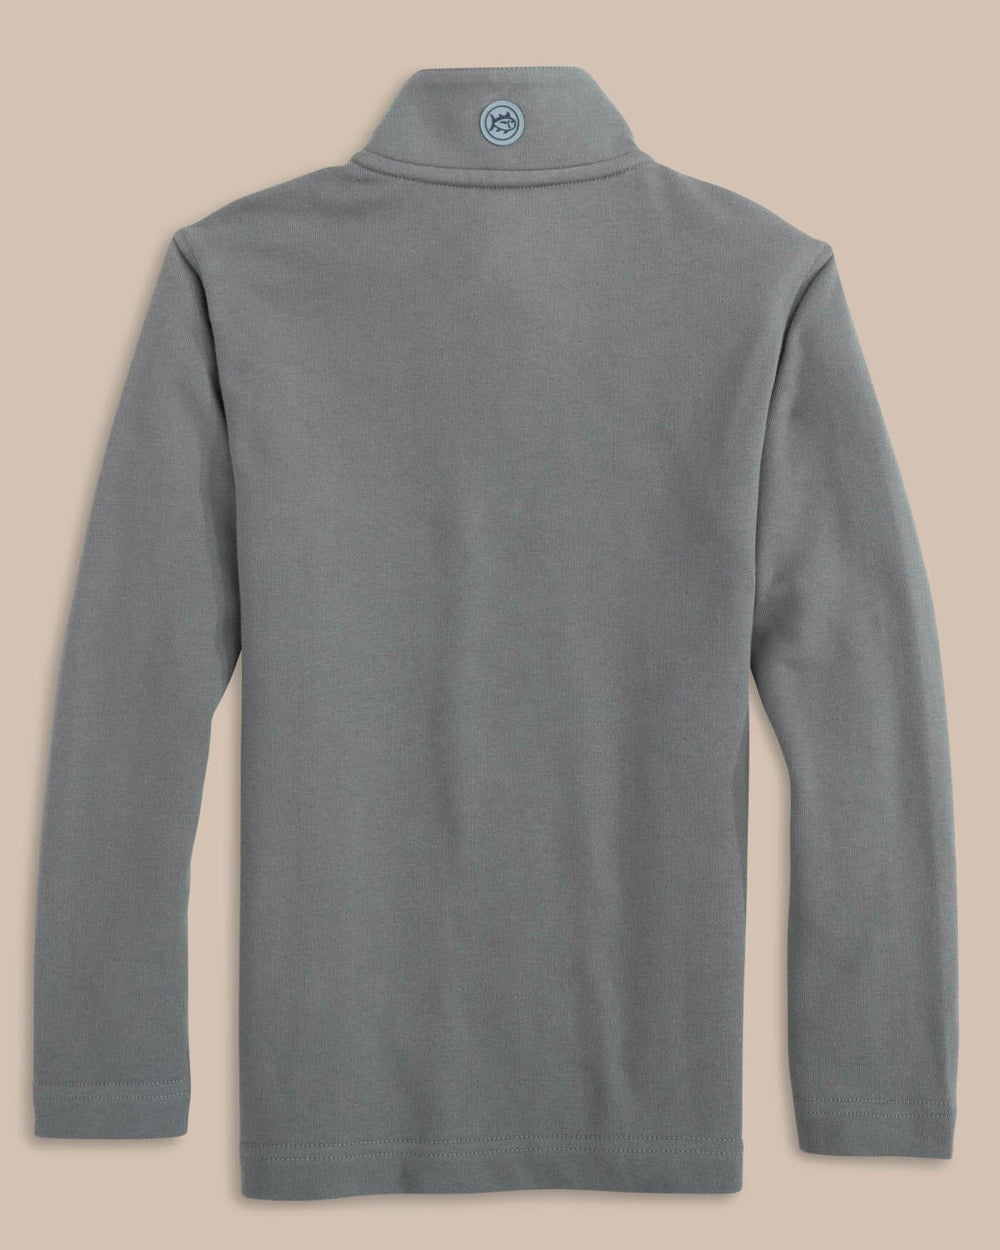 The back view of the Southern Tide Youth McLain Quarter Zip by Southern Tide - Shadow Grey